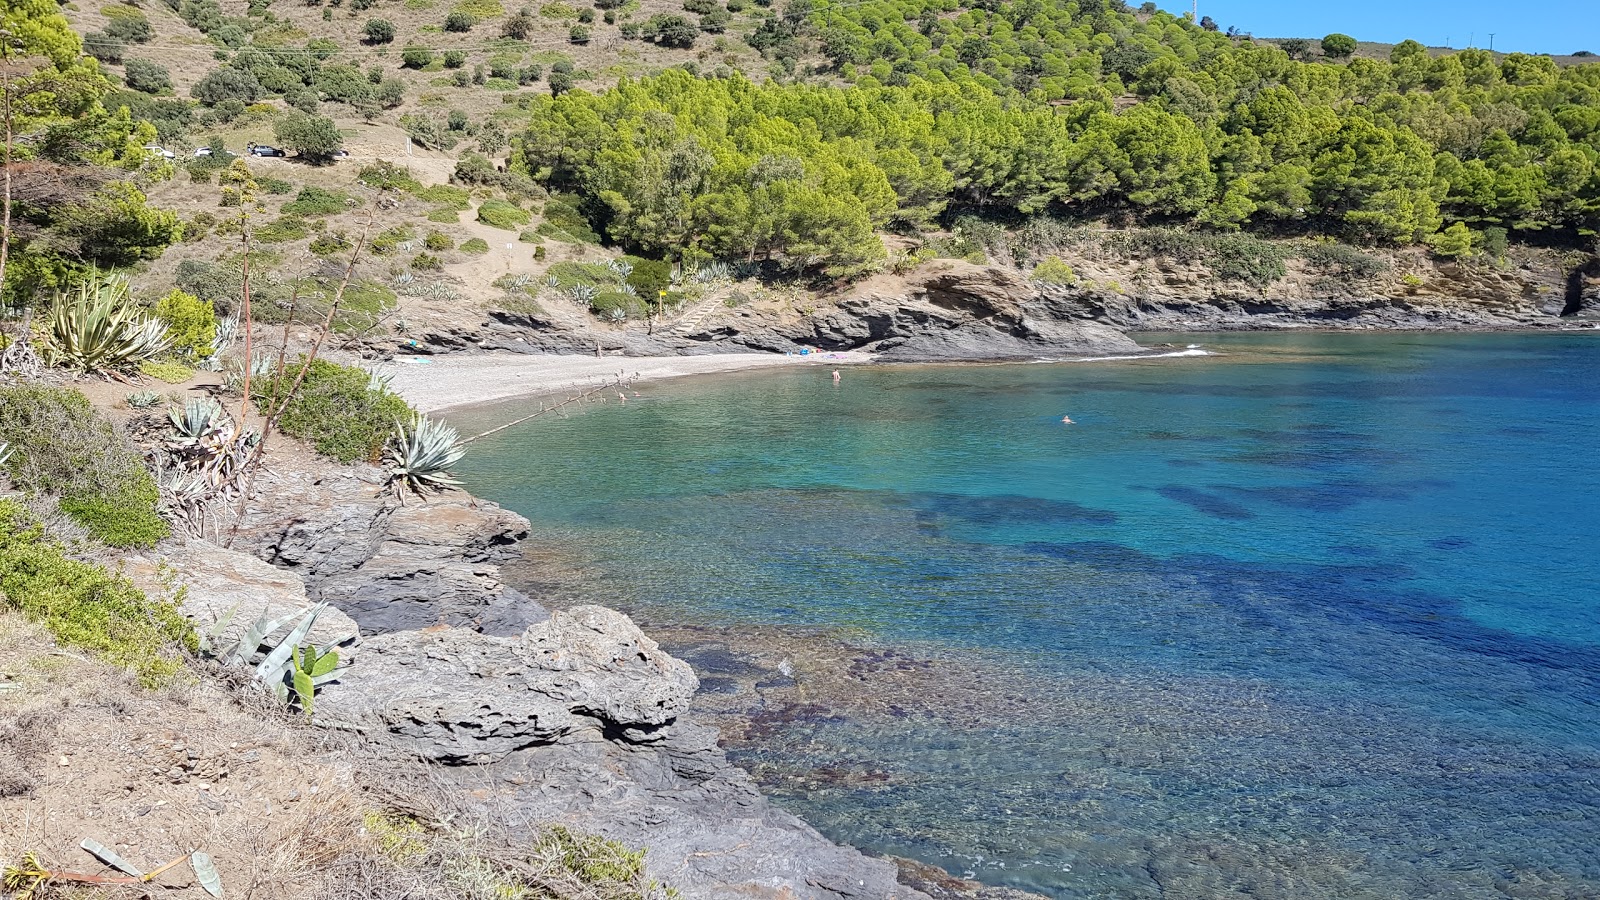 Photo of Cala Calitjas with blue pure water surface